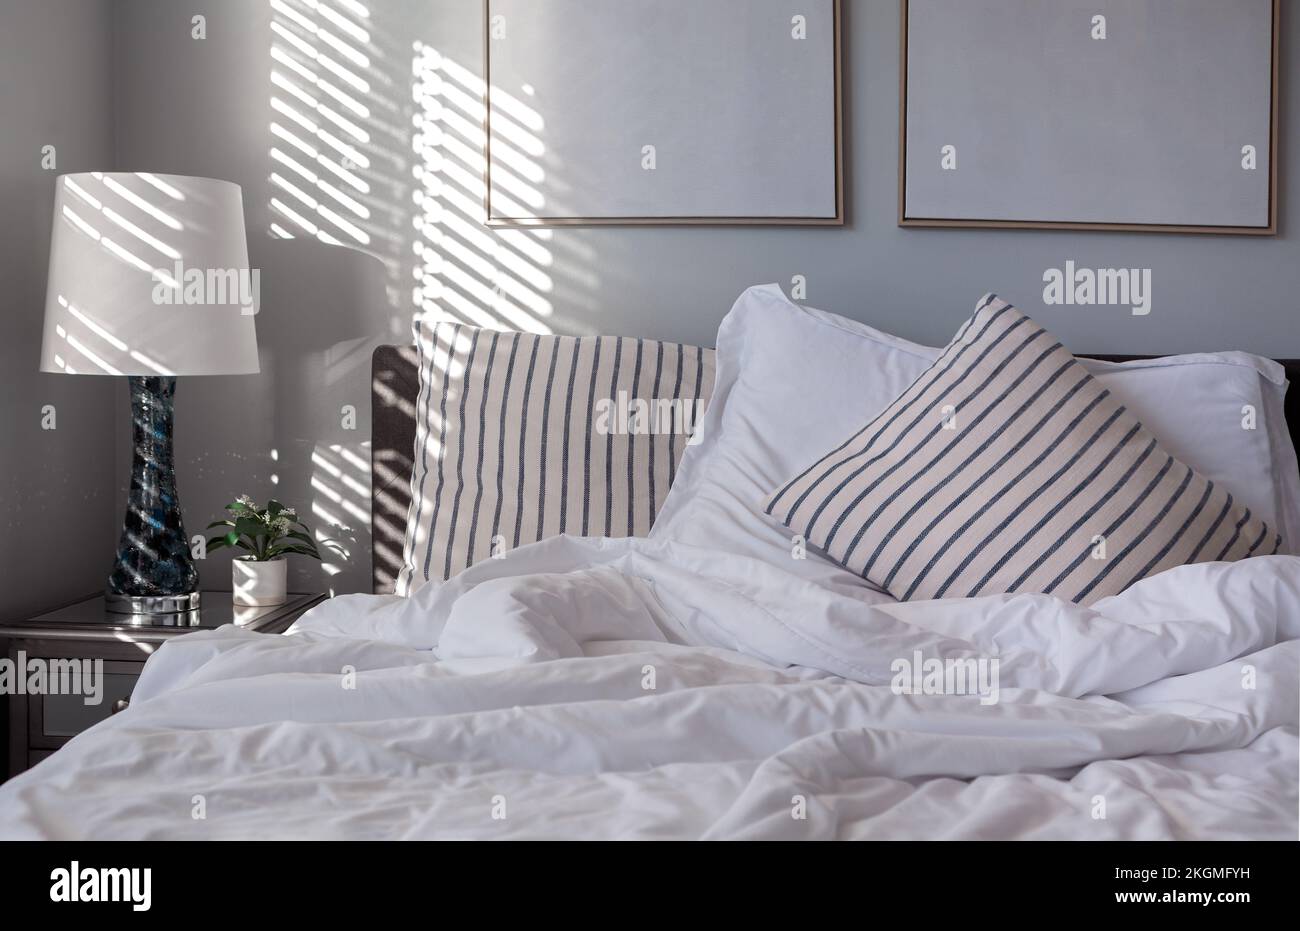 Early morning light casts light and shadows from window blinds onto striped accent pillows and blue and white covers on a bed Stock Photo